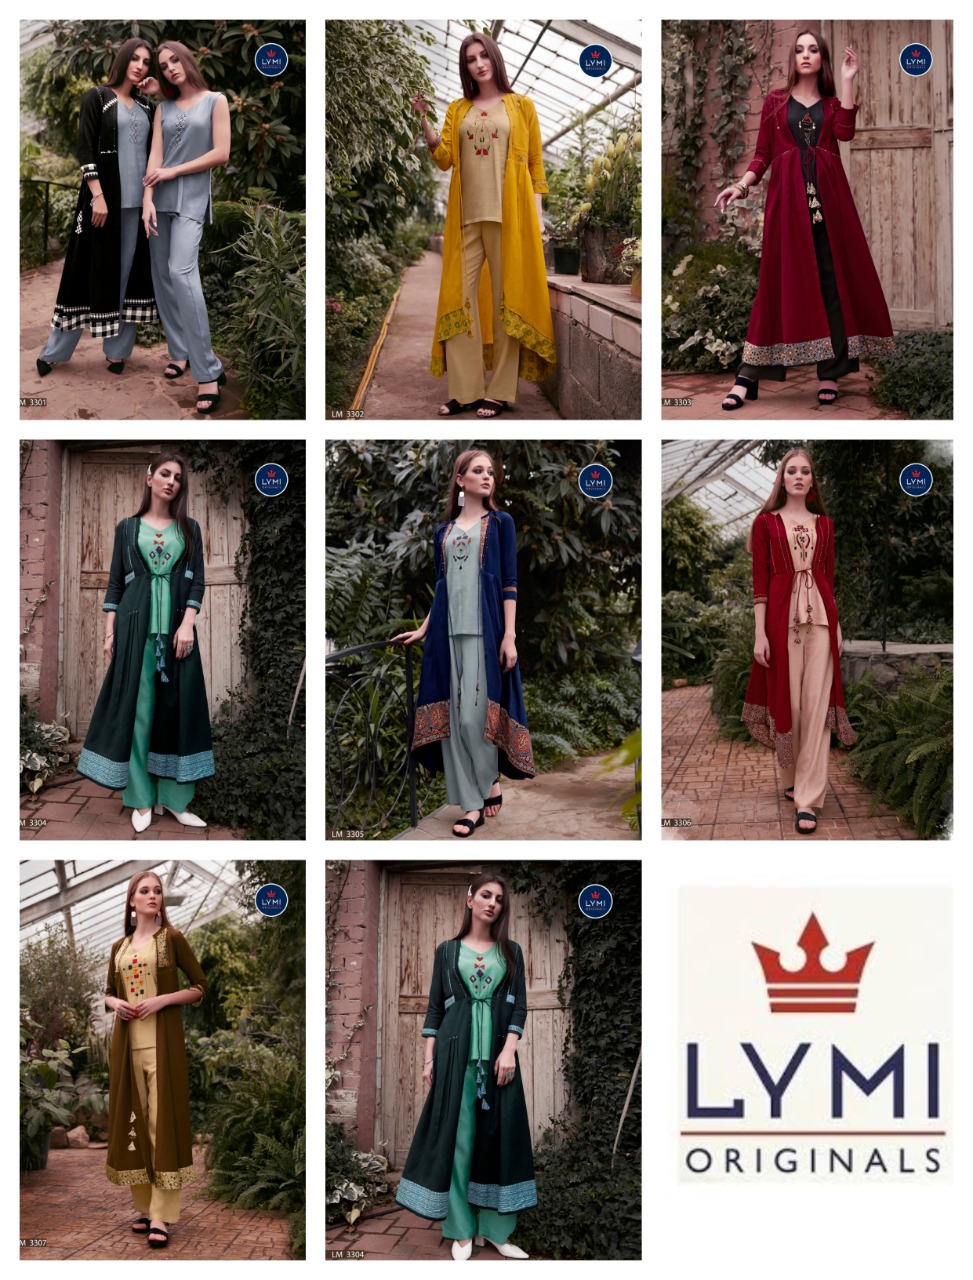 Lymi Genesis a new and attractive look classy catchy look Kurties